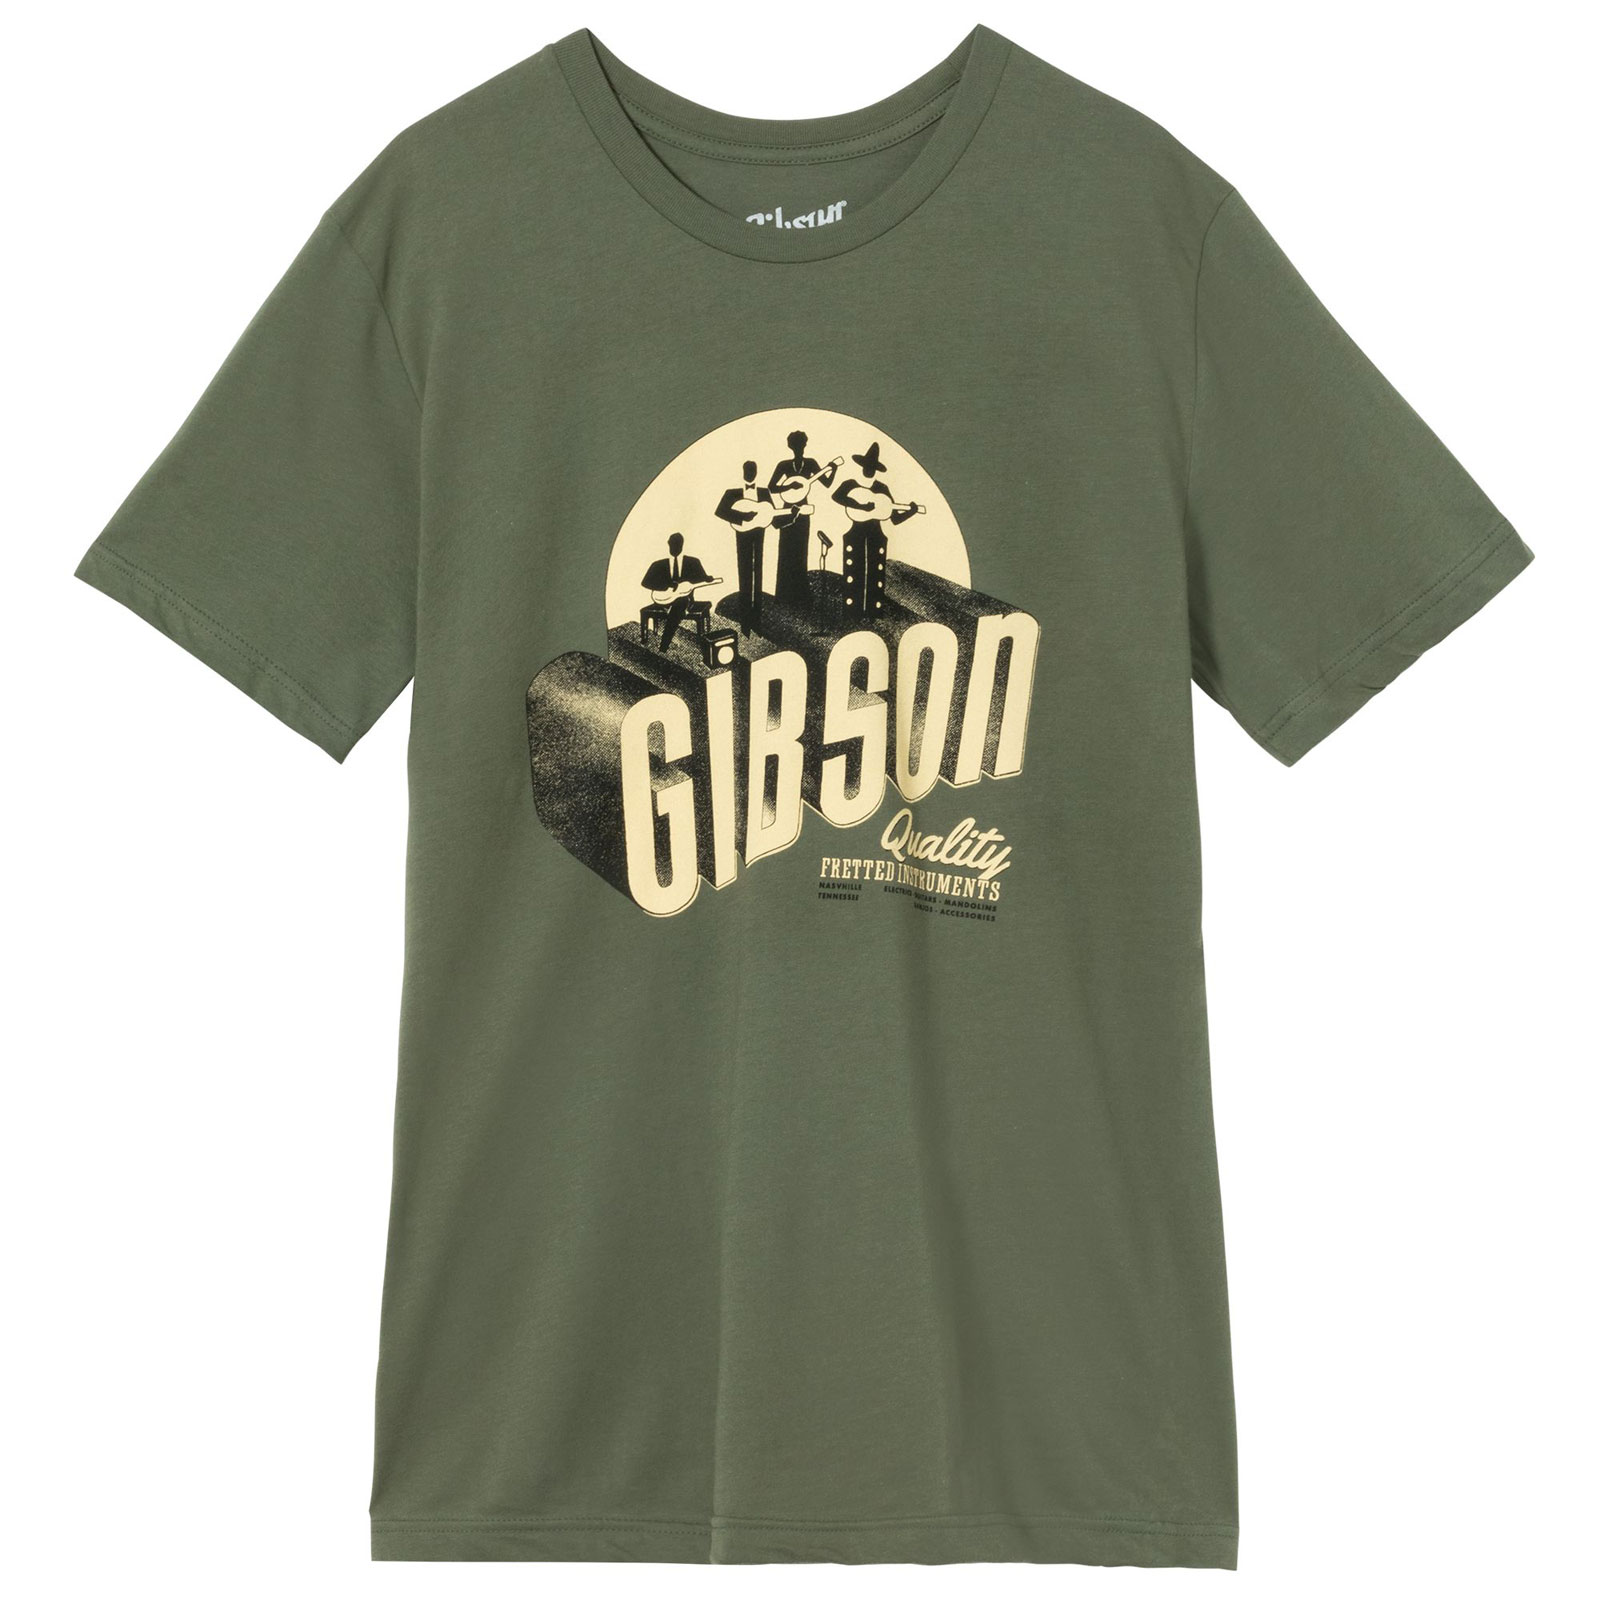 GIBSON ACCESSORIES THE BAND TEE ARMY GREEN SIZE M 